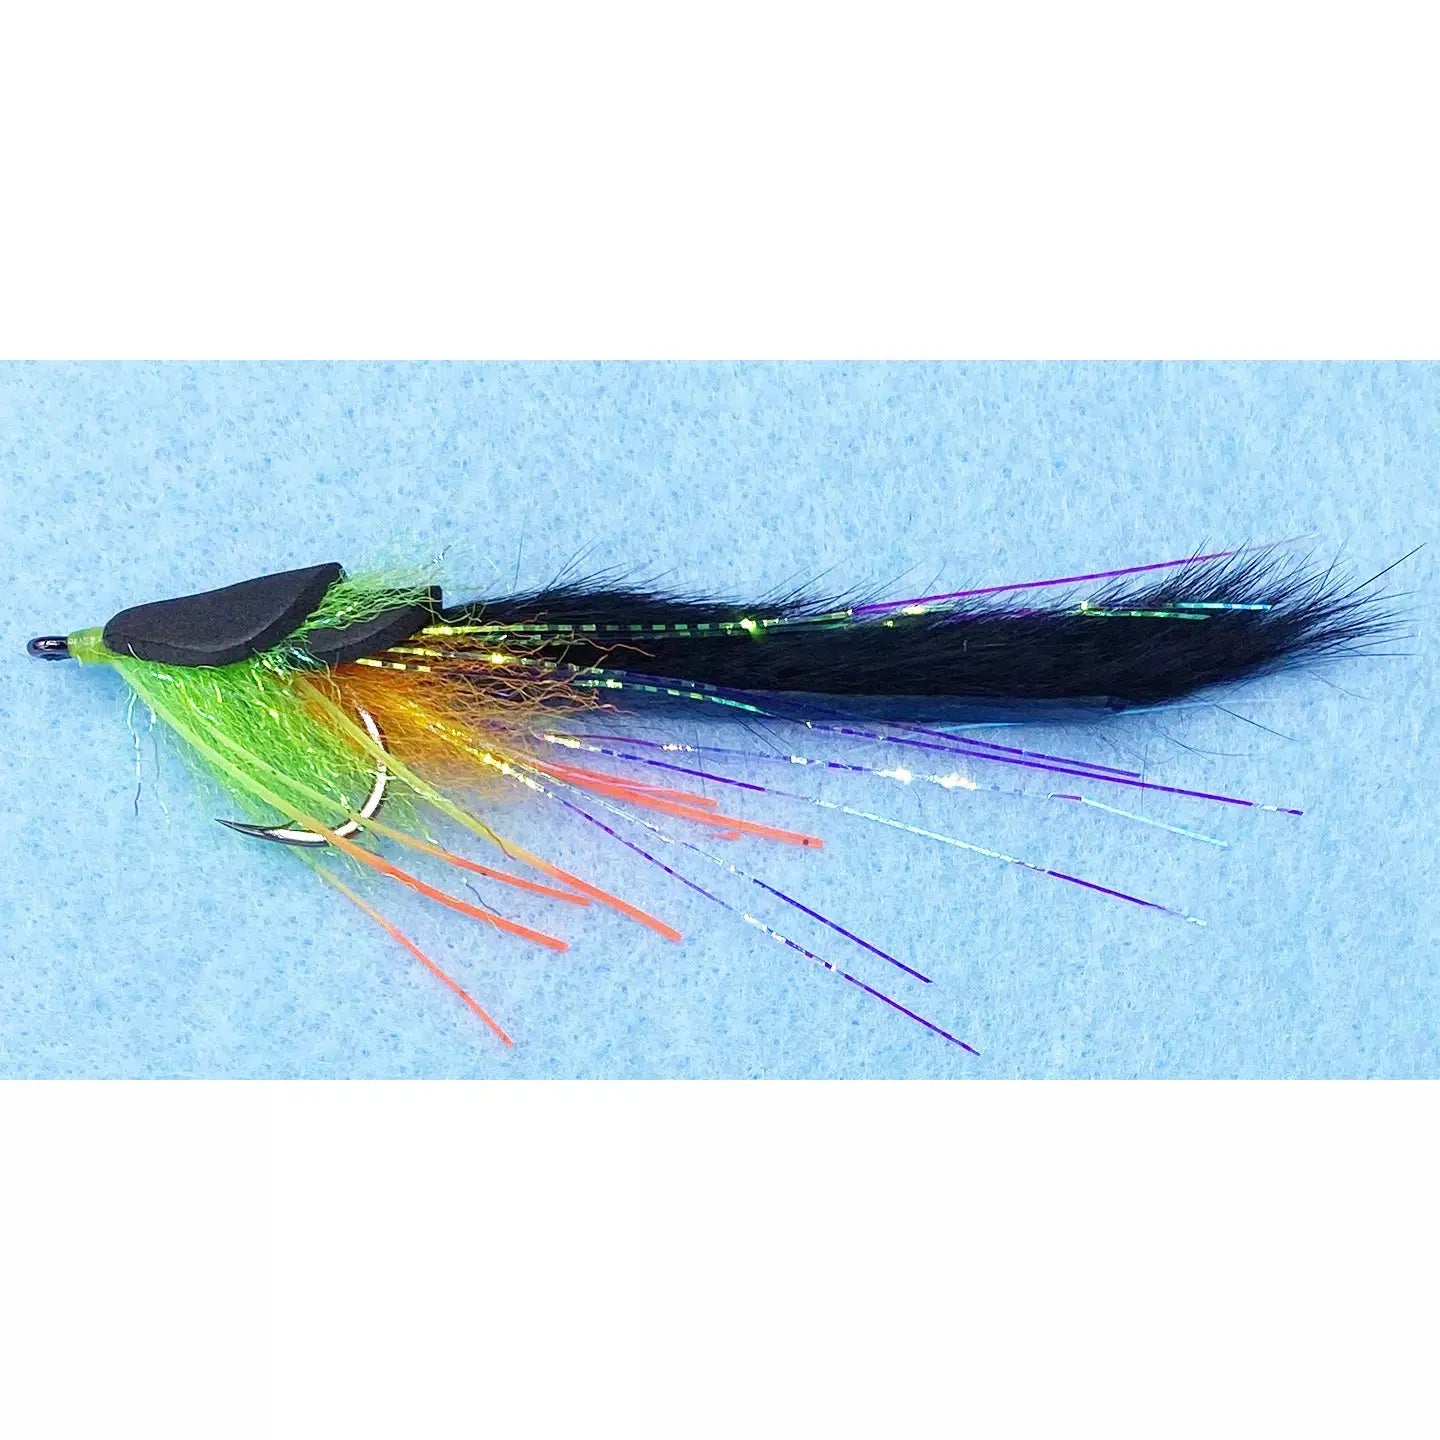 Enrico Puglisi Diver Fly-Lure - Fly-Enrico Puglisi-Black/Chartreuse-Size 2/0-Fishing Station